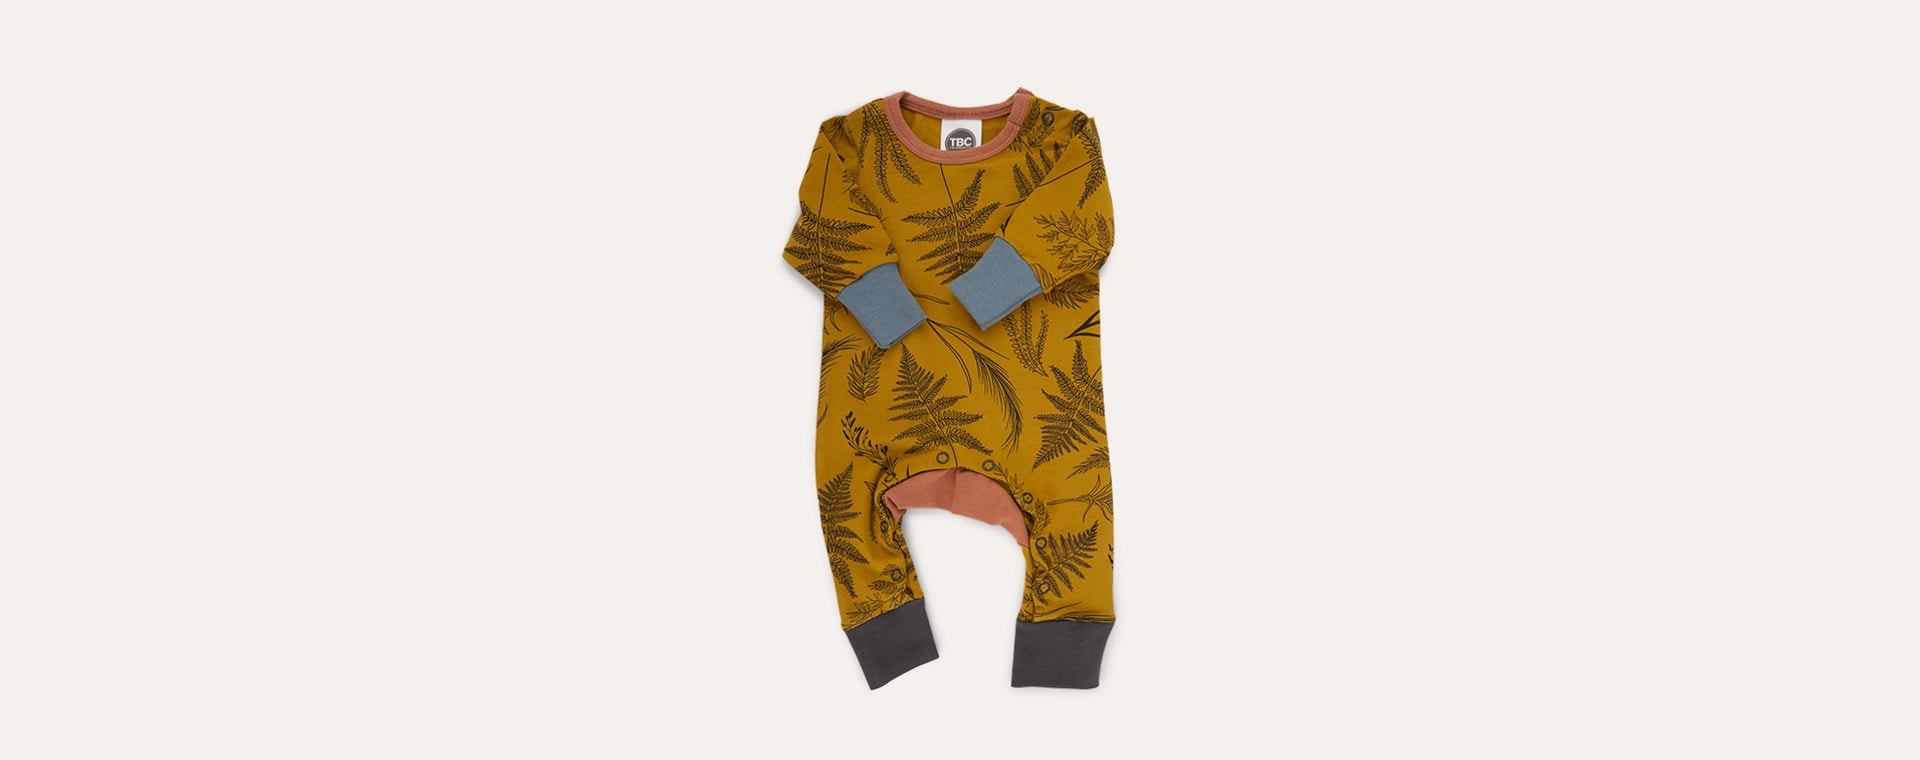 CHRISTMAS SPECIALS / MOSS FERN The Bright Company Monty Sleepsuit